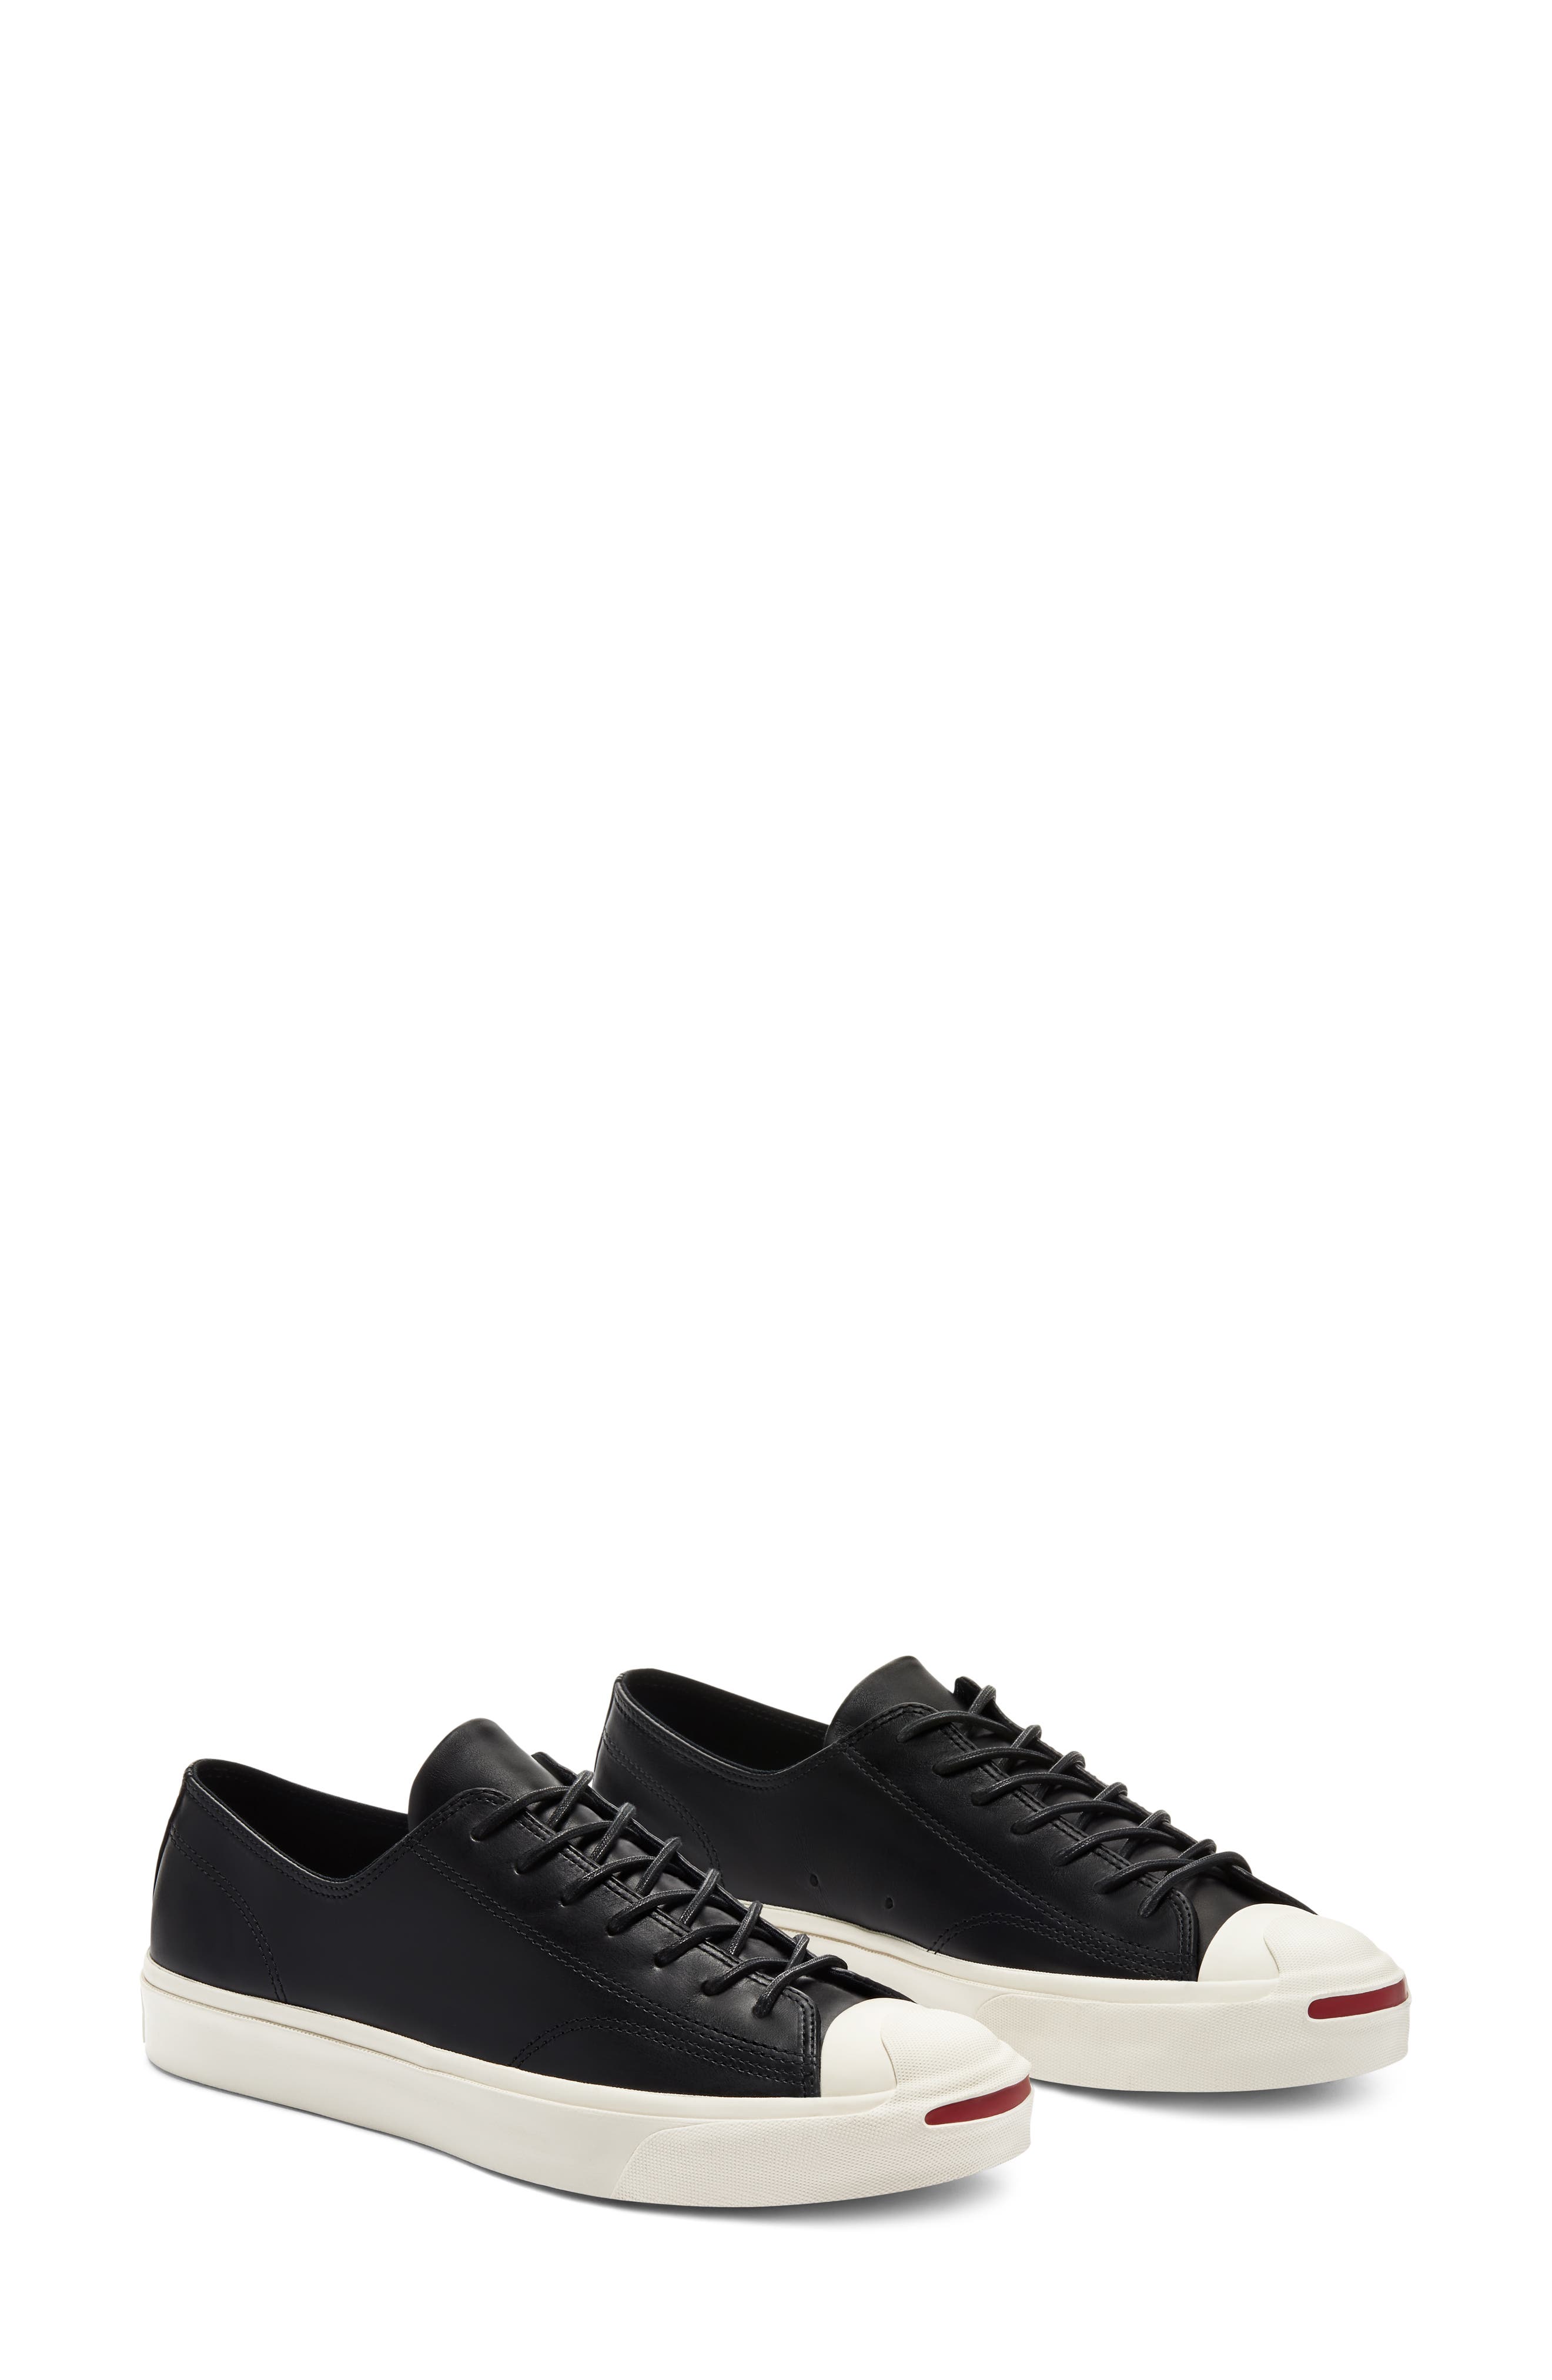 jack purcell sneakers leather